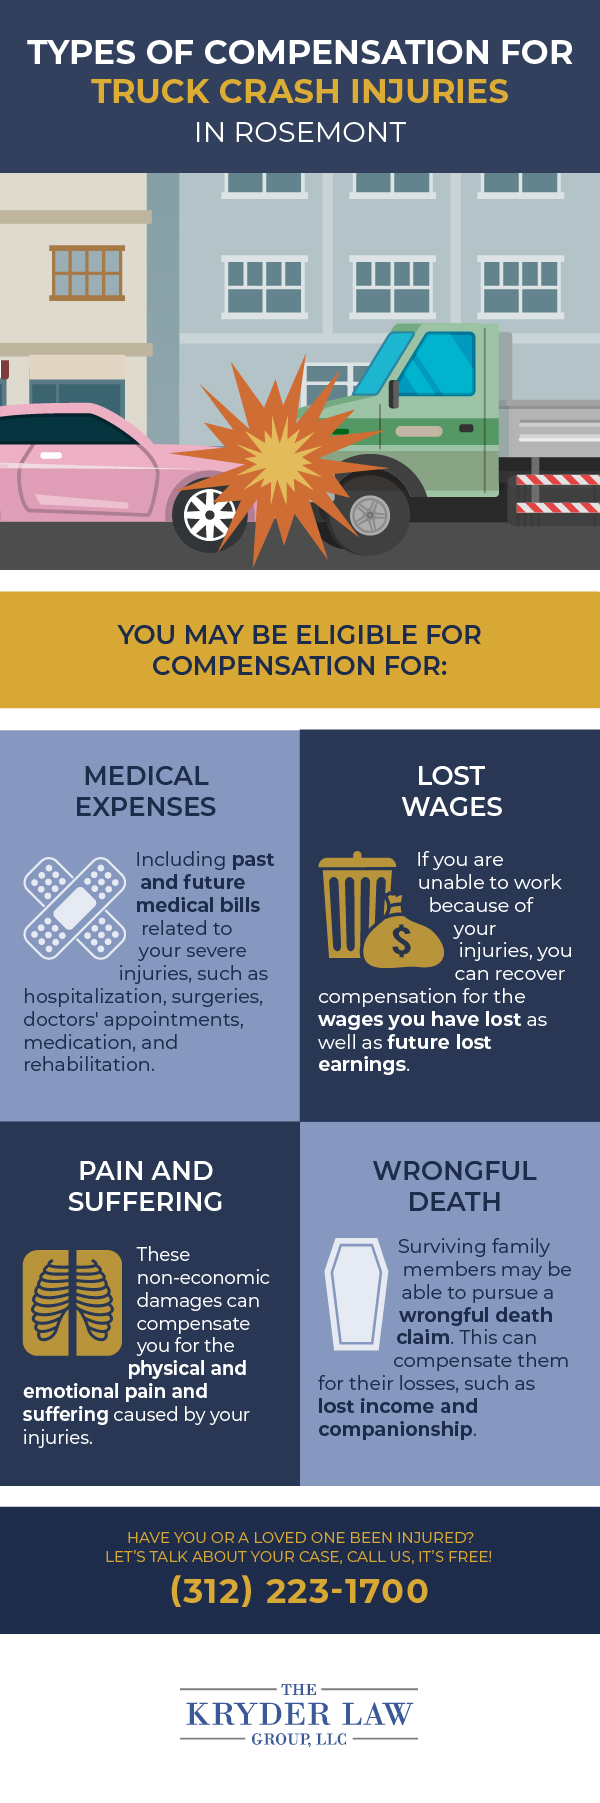 Types of Compensation for Truck Crash Injuries in Rosemont Infographic